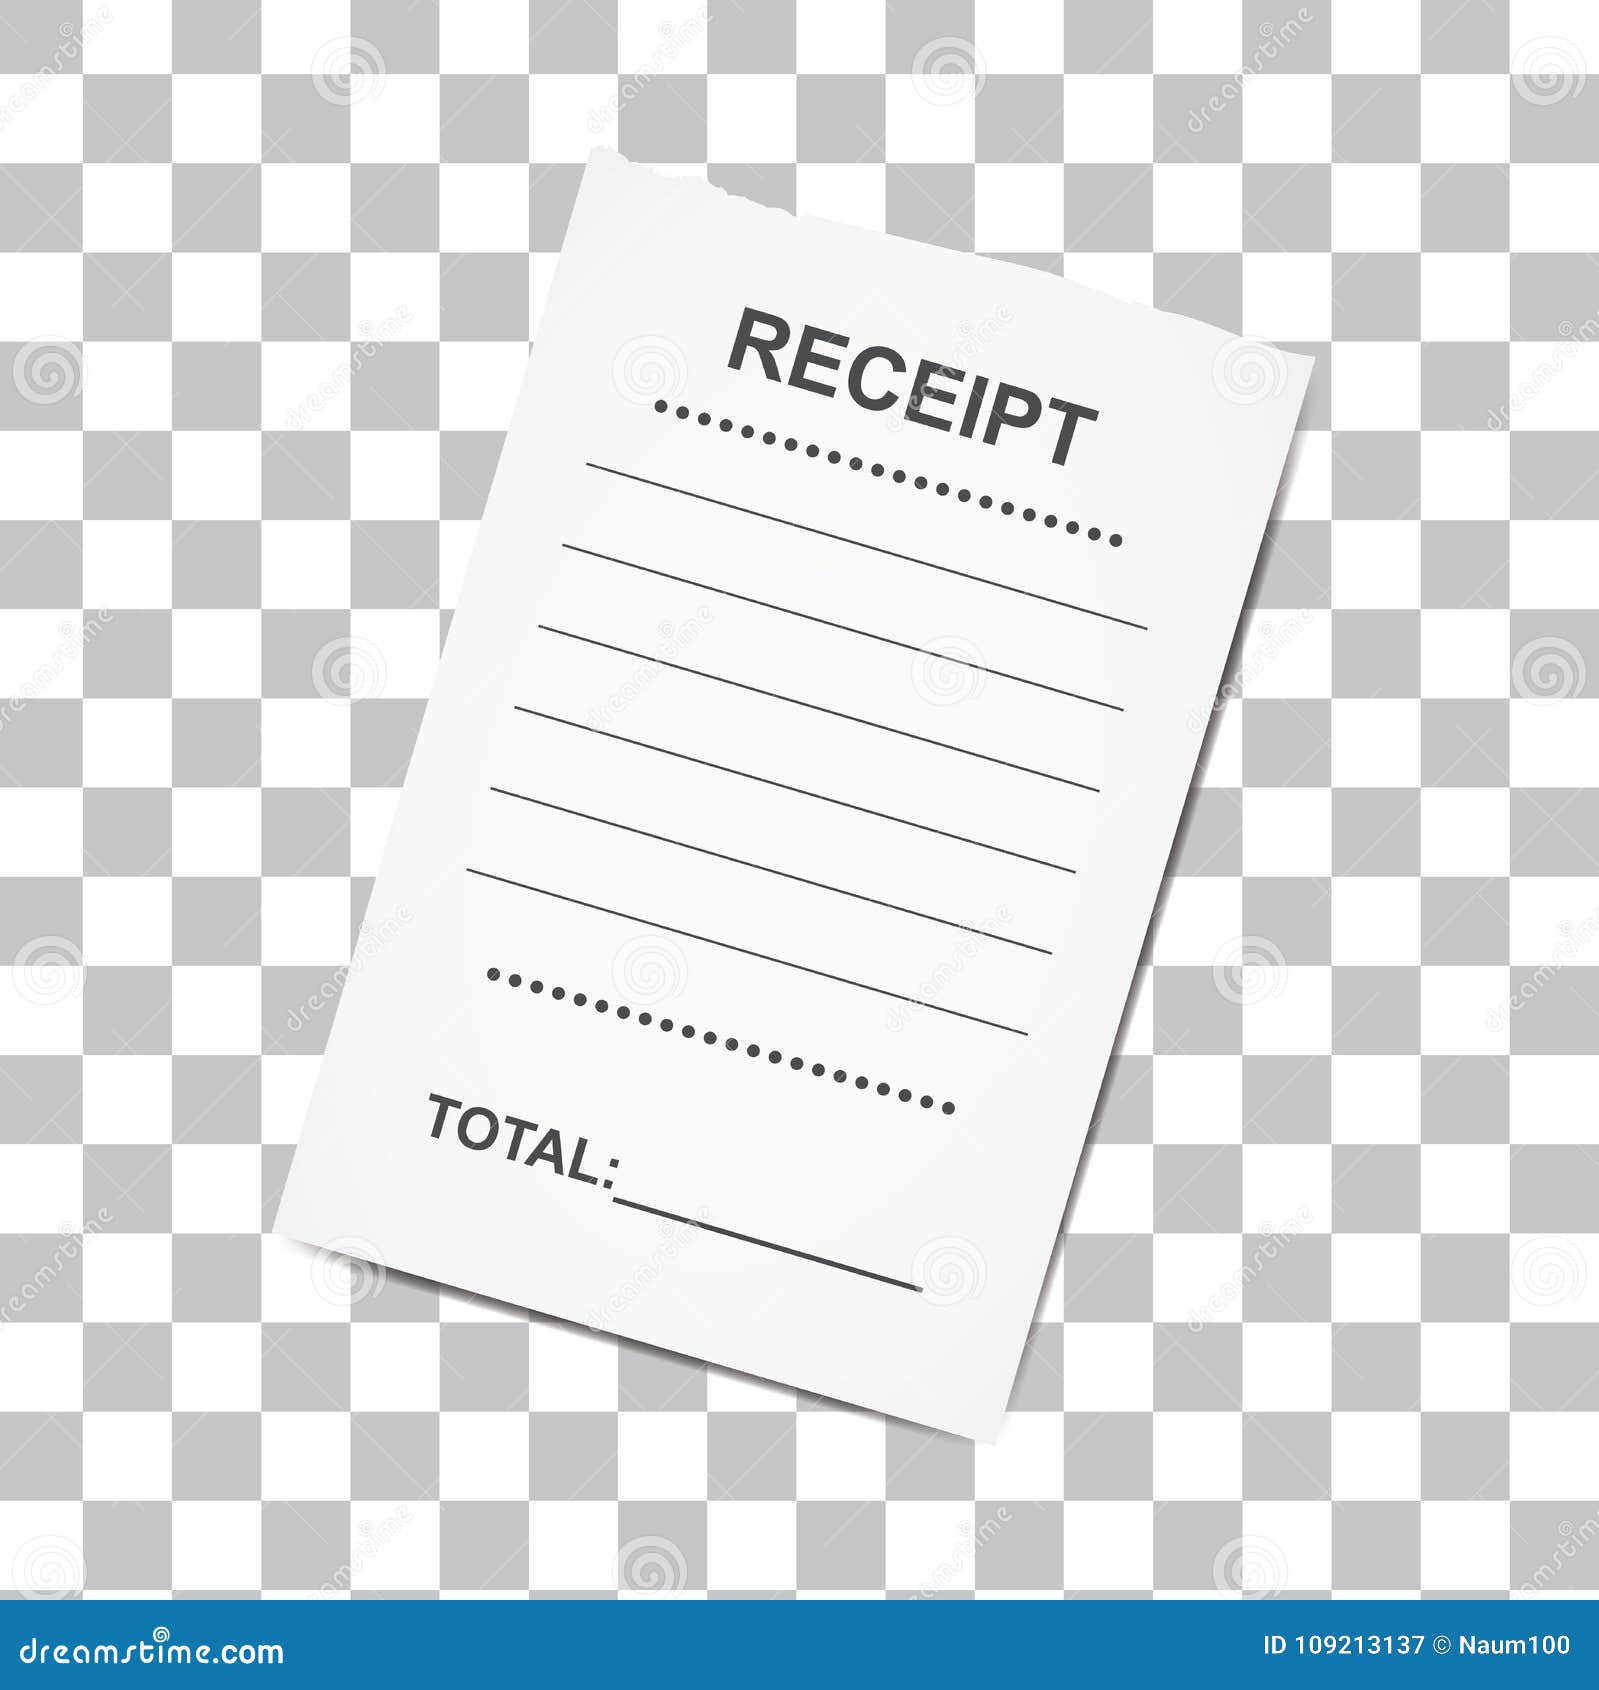 sales-printed-receipt-template-stock-vector-illustration-of-money-purchase-109213137